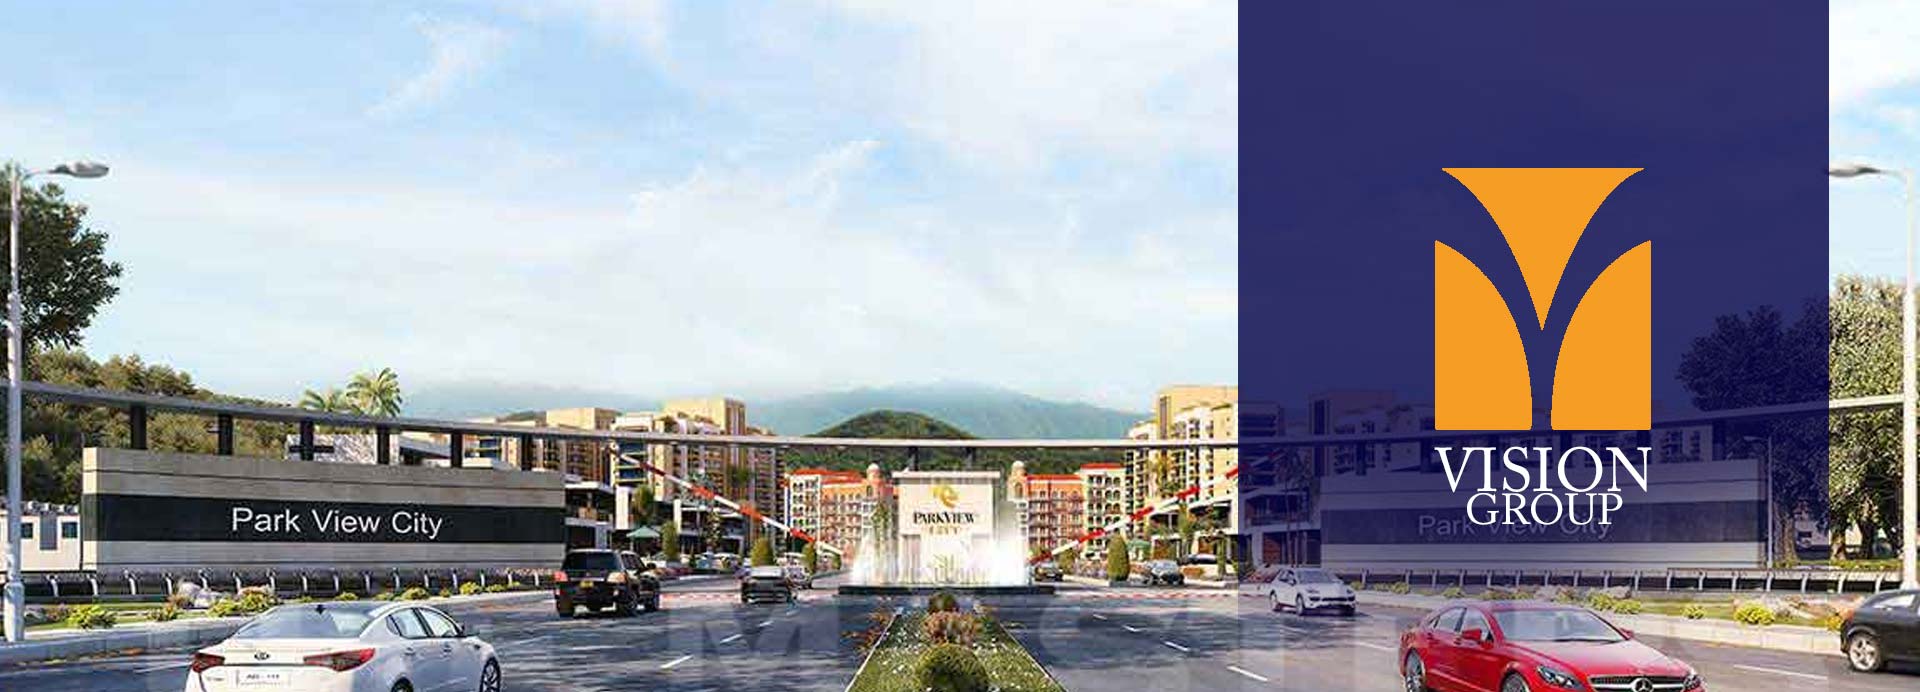 Park View City islamabad Owner and Developer